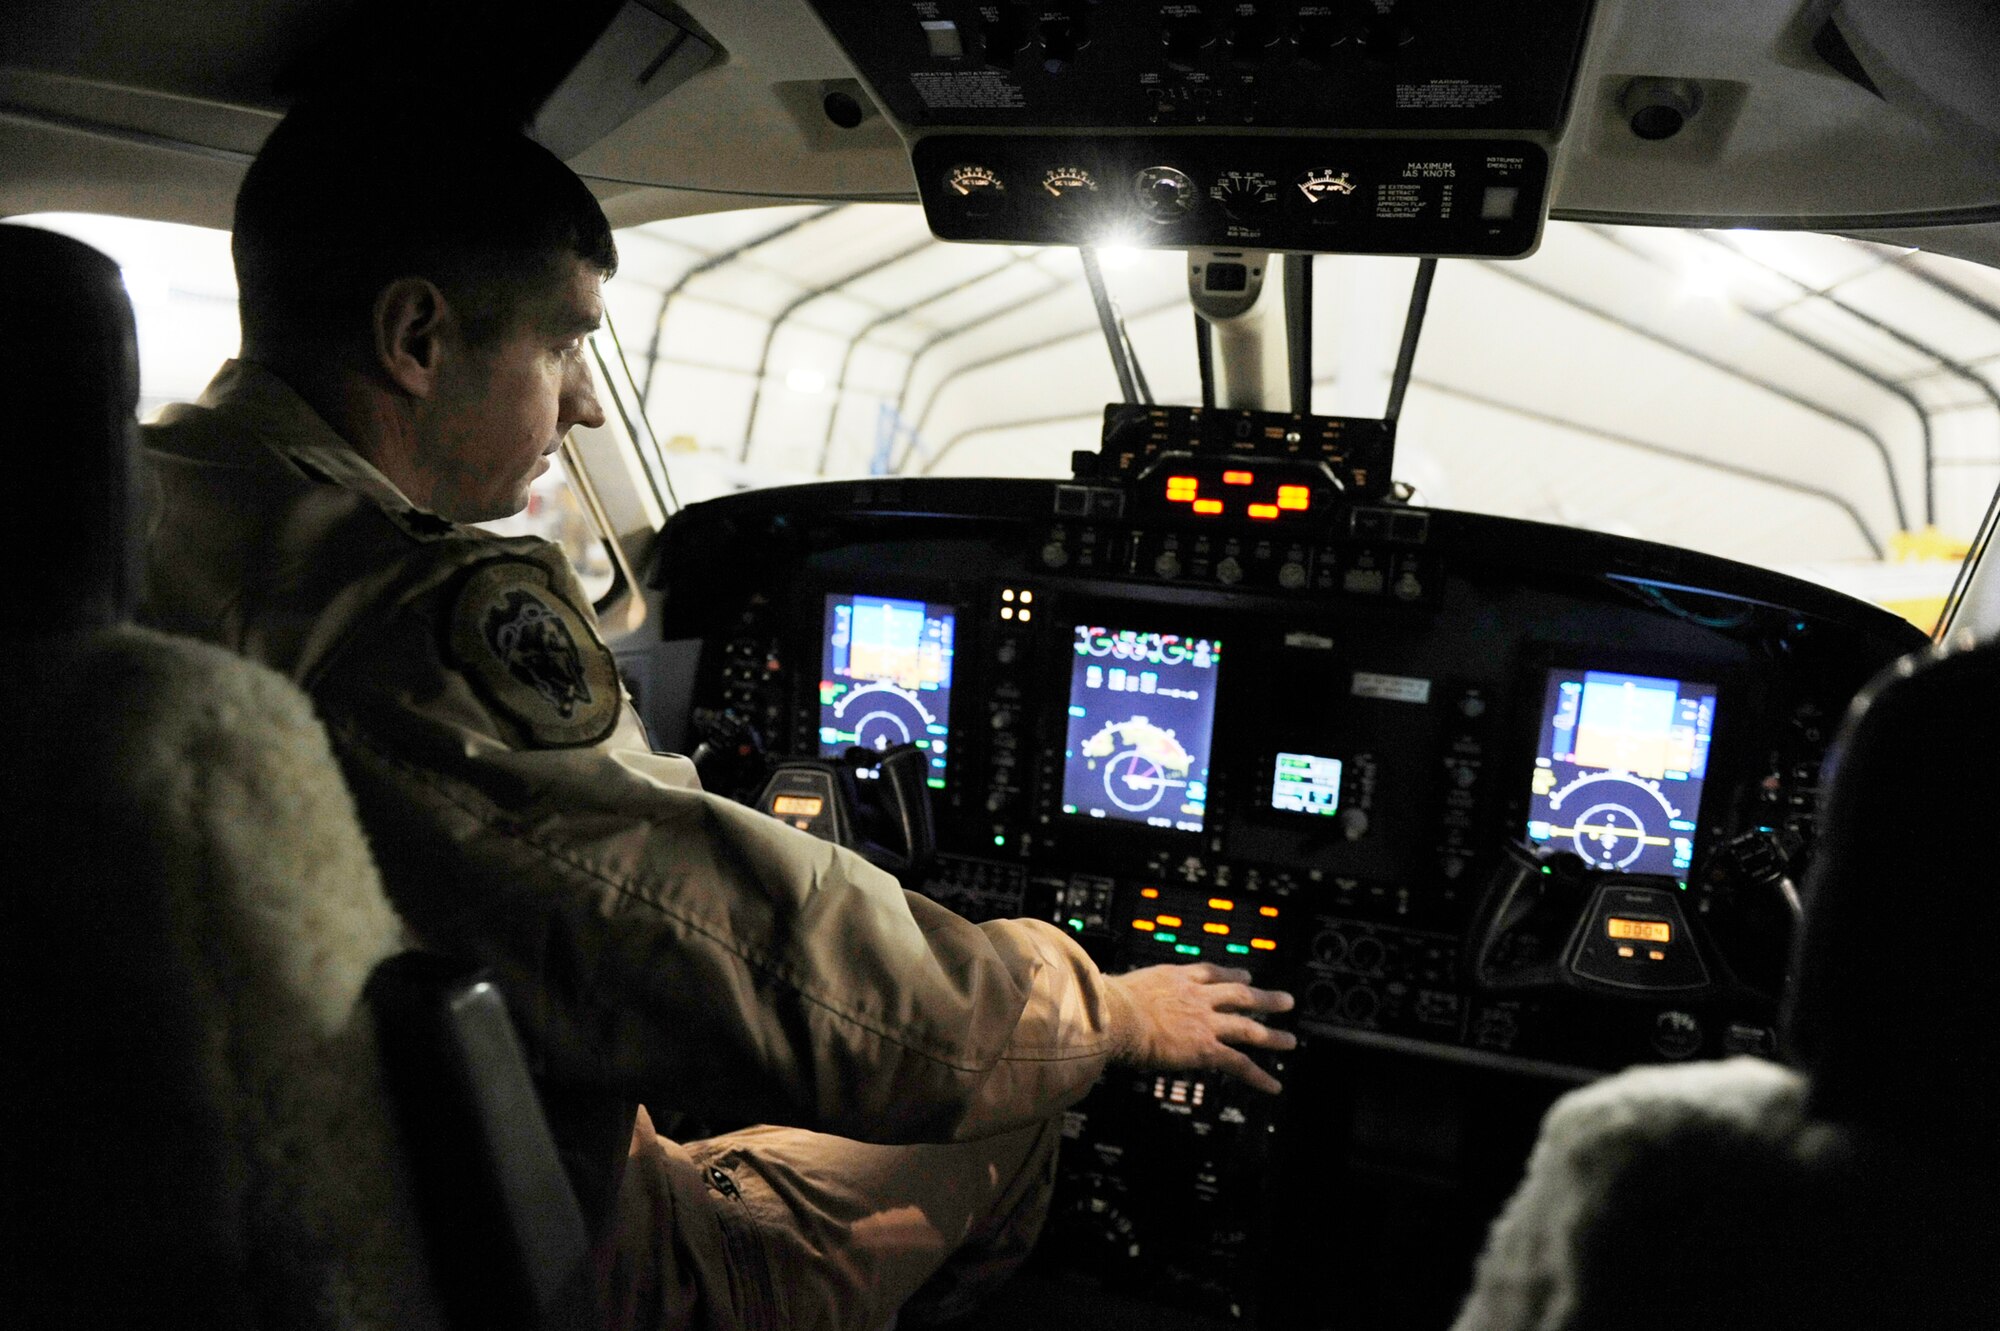 Lt. Col. Rob Weaver, the 4th Expeditionary Reconnaissance Squadron director of operations at Bagram Airfield, Afghanistan, goes through a routine check of the instrument panel in an MC-12 Liberty Feb. 27, 2010. The MC-12 brings tactical intelligence, surveillance and reconnaissance to ground commanders in Afghanistan. (U.S. Air Force photo/Staff Sgt. Manuel J. Martinez)